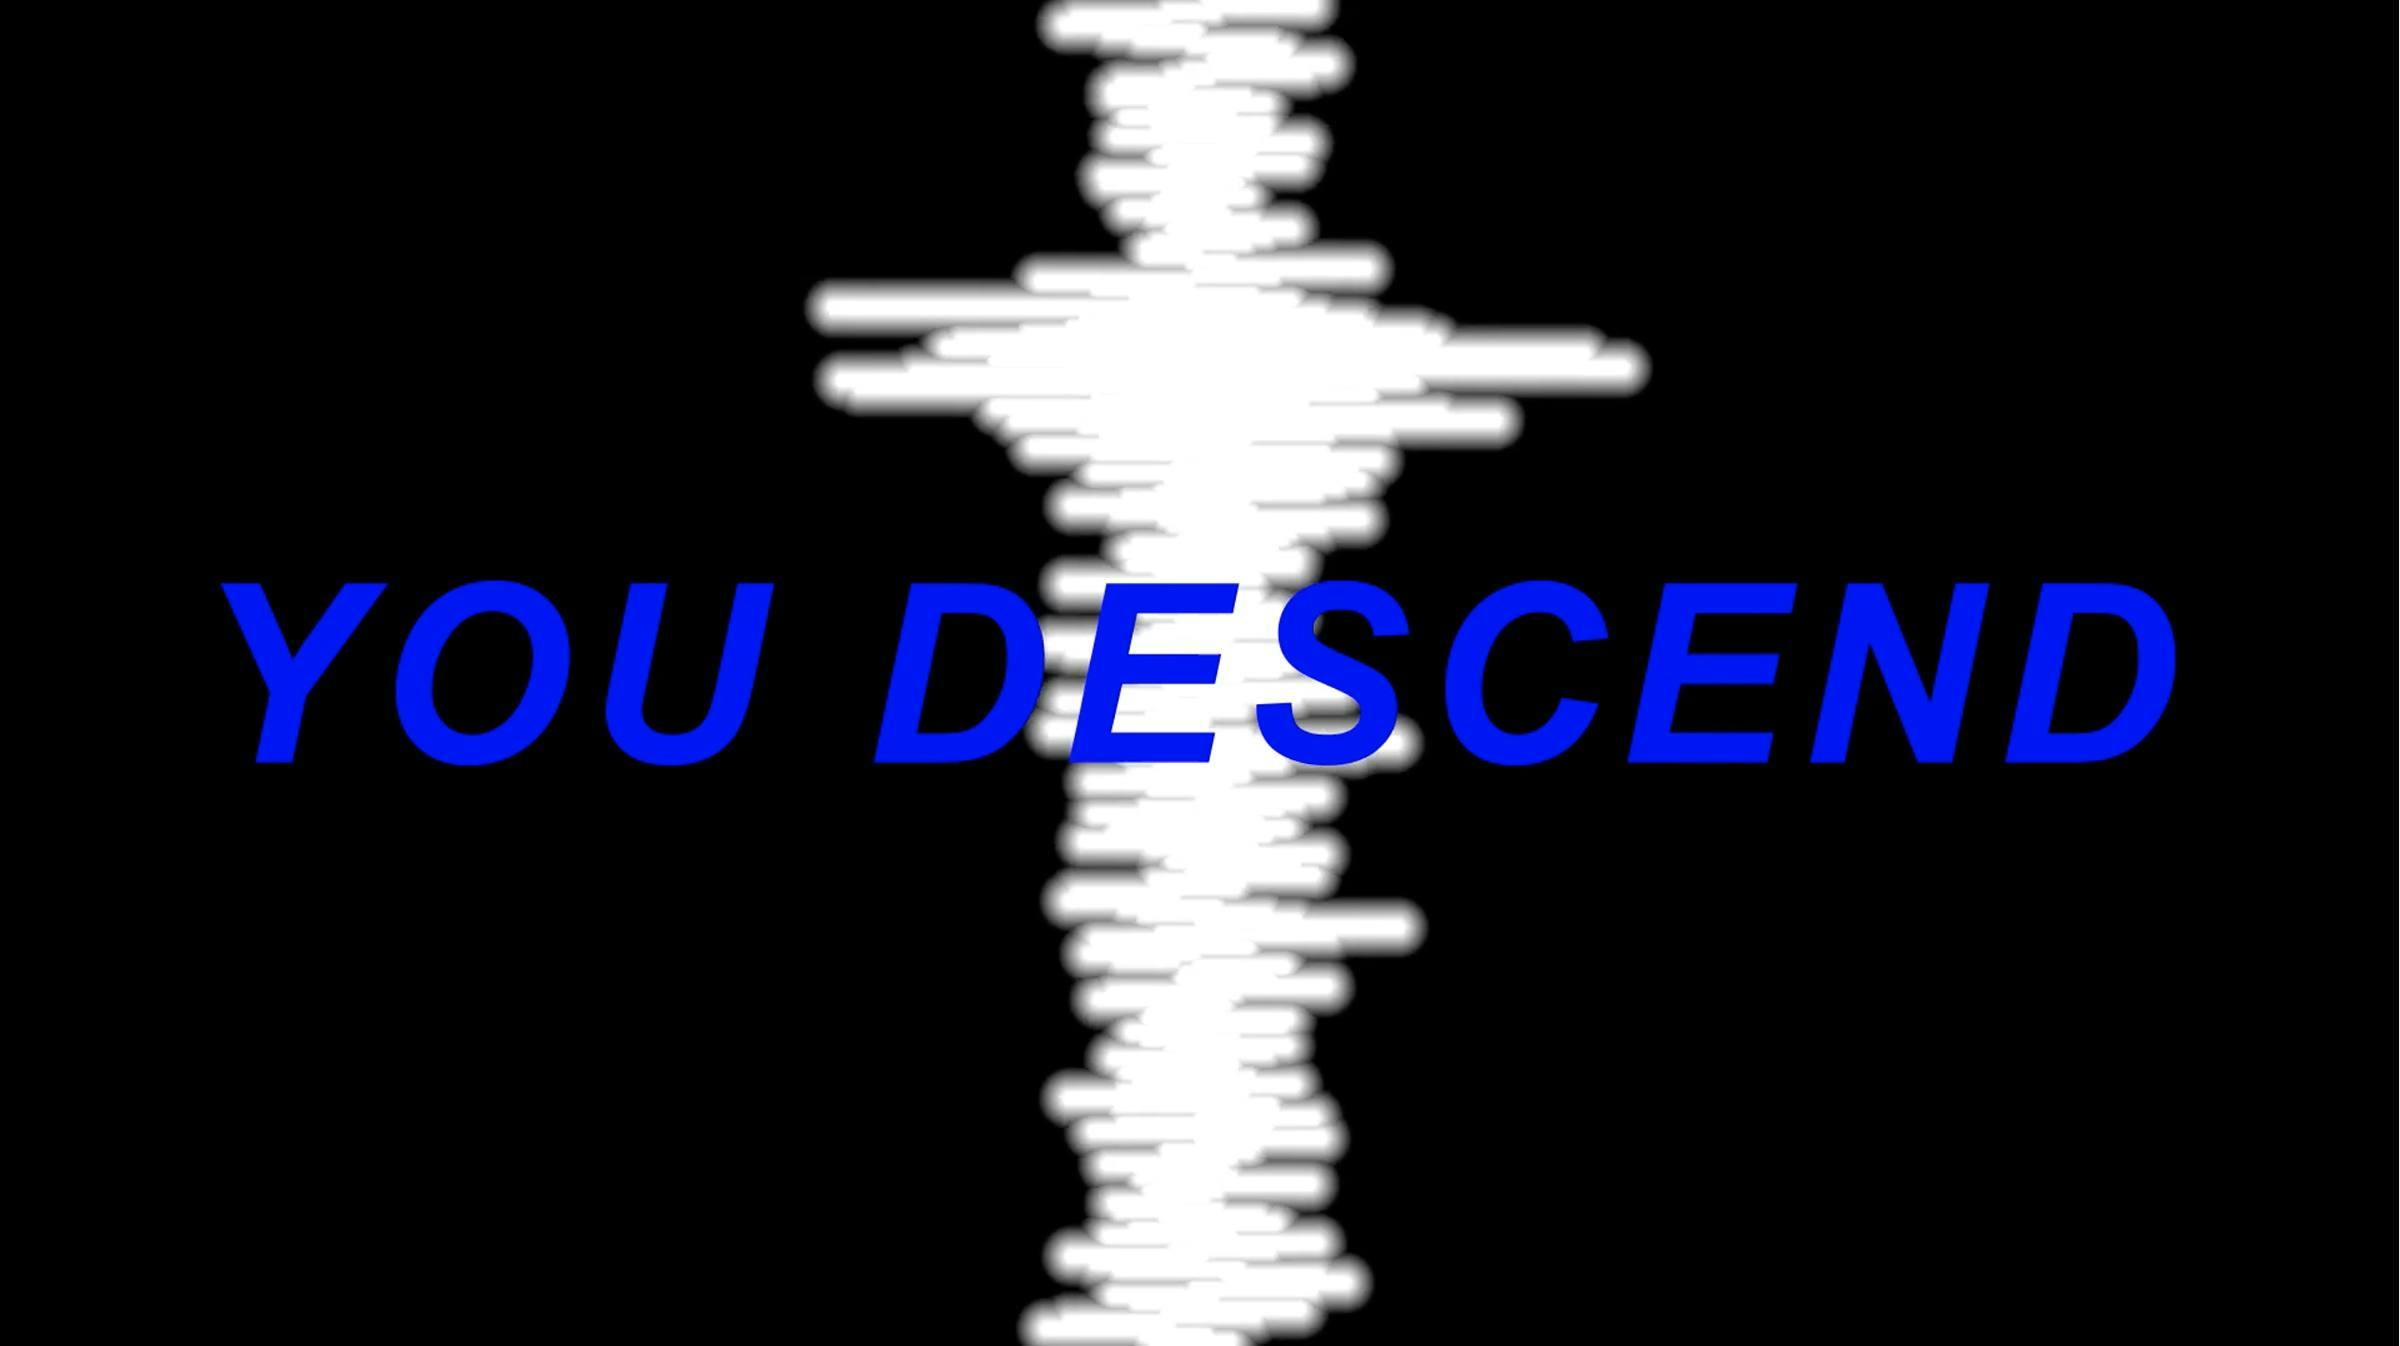 an image of blue text 'YOU DESCEND' sits on top of a white visualization of sound. The background is black.